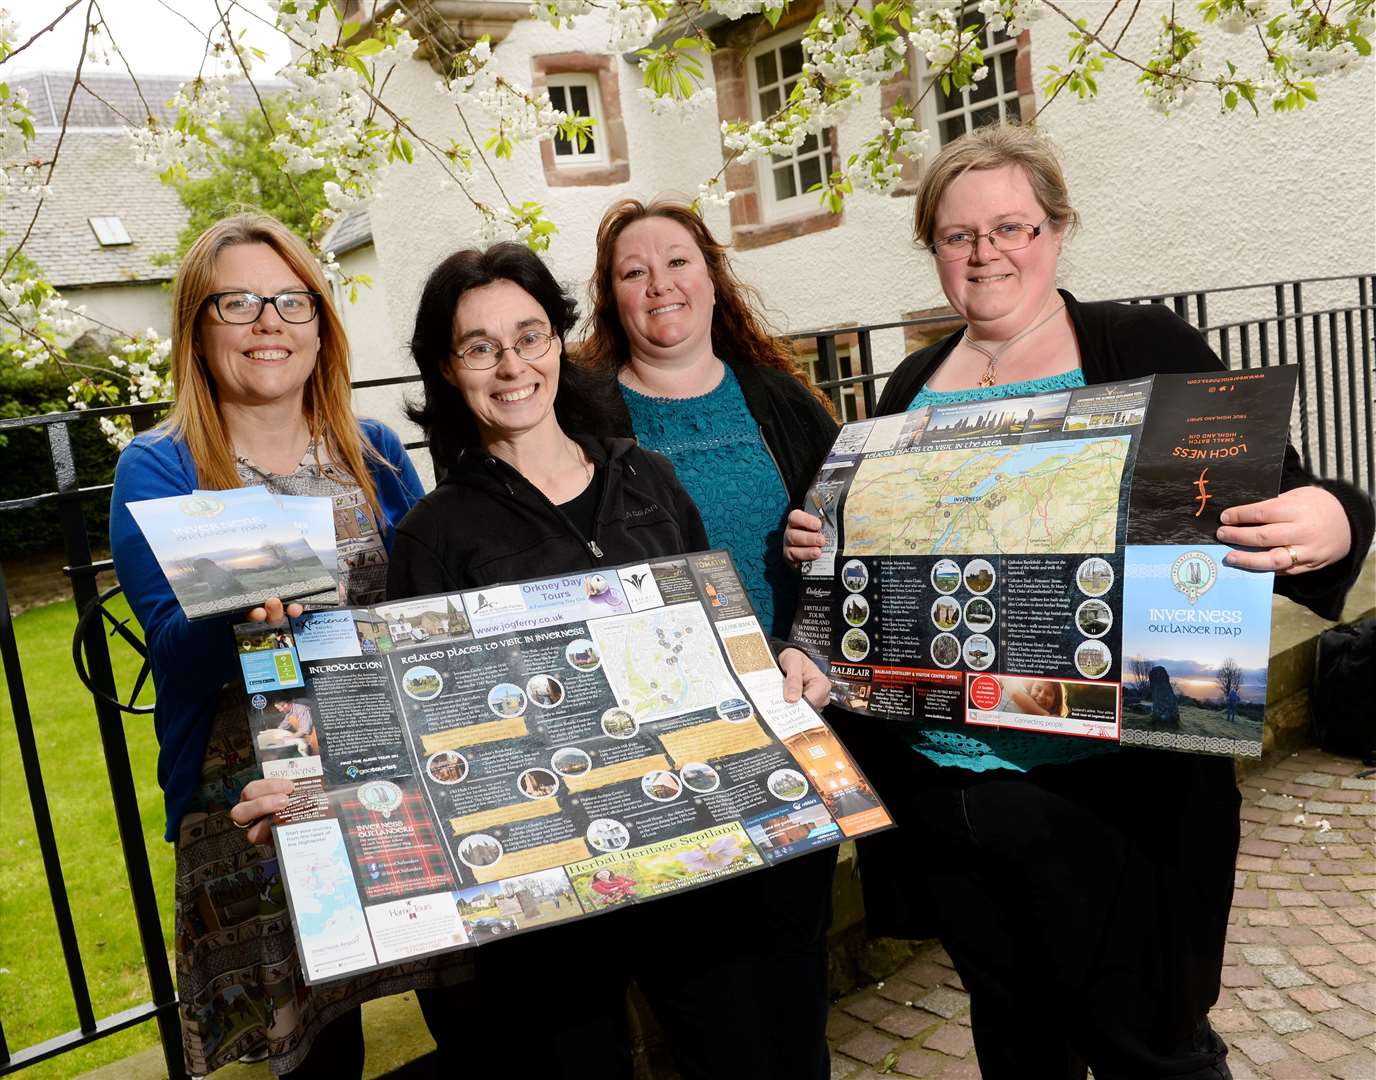 Inverness Outlanders launched their map last year. From left: Sinead Robertson, Lisa Davies, Julie Mutch and Carol Ann McRitchie. Picture: Gary Anthony. Image No.041052.